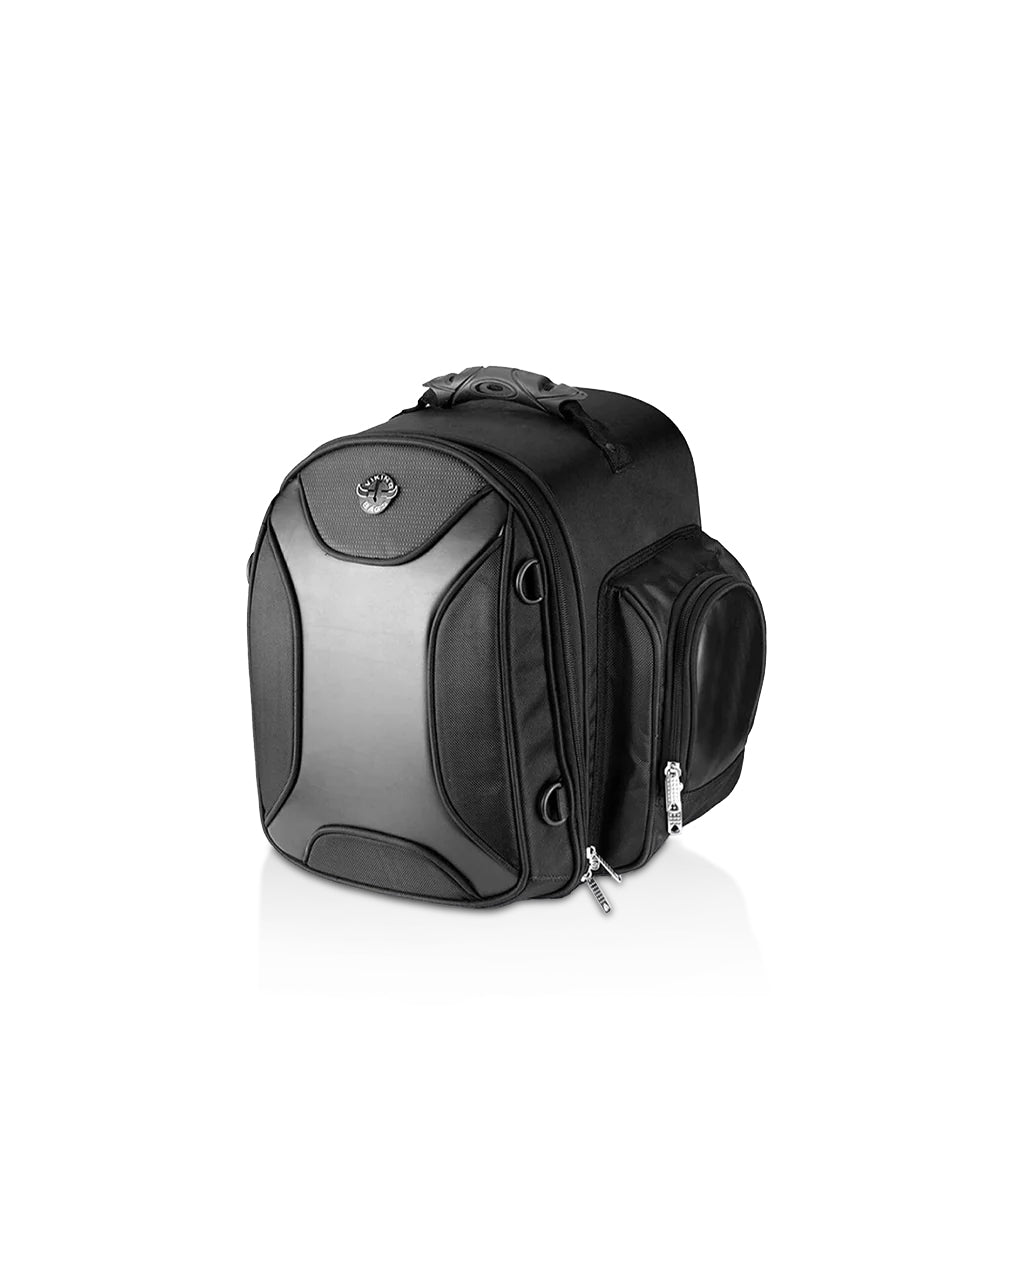 13L - Dagr Small Hysoung Motorcycle Tail Bag